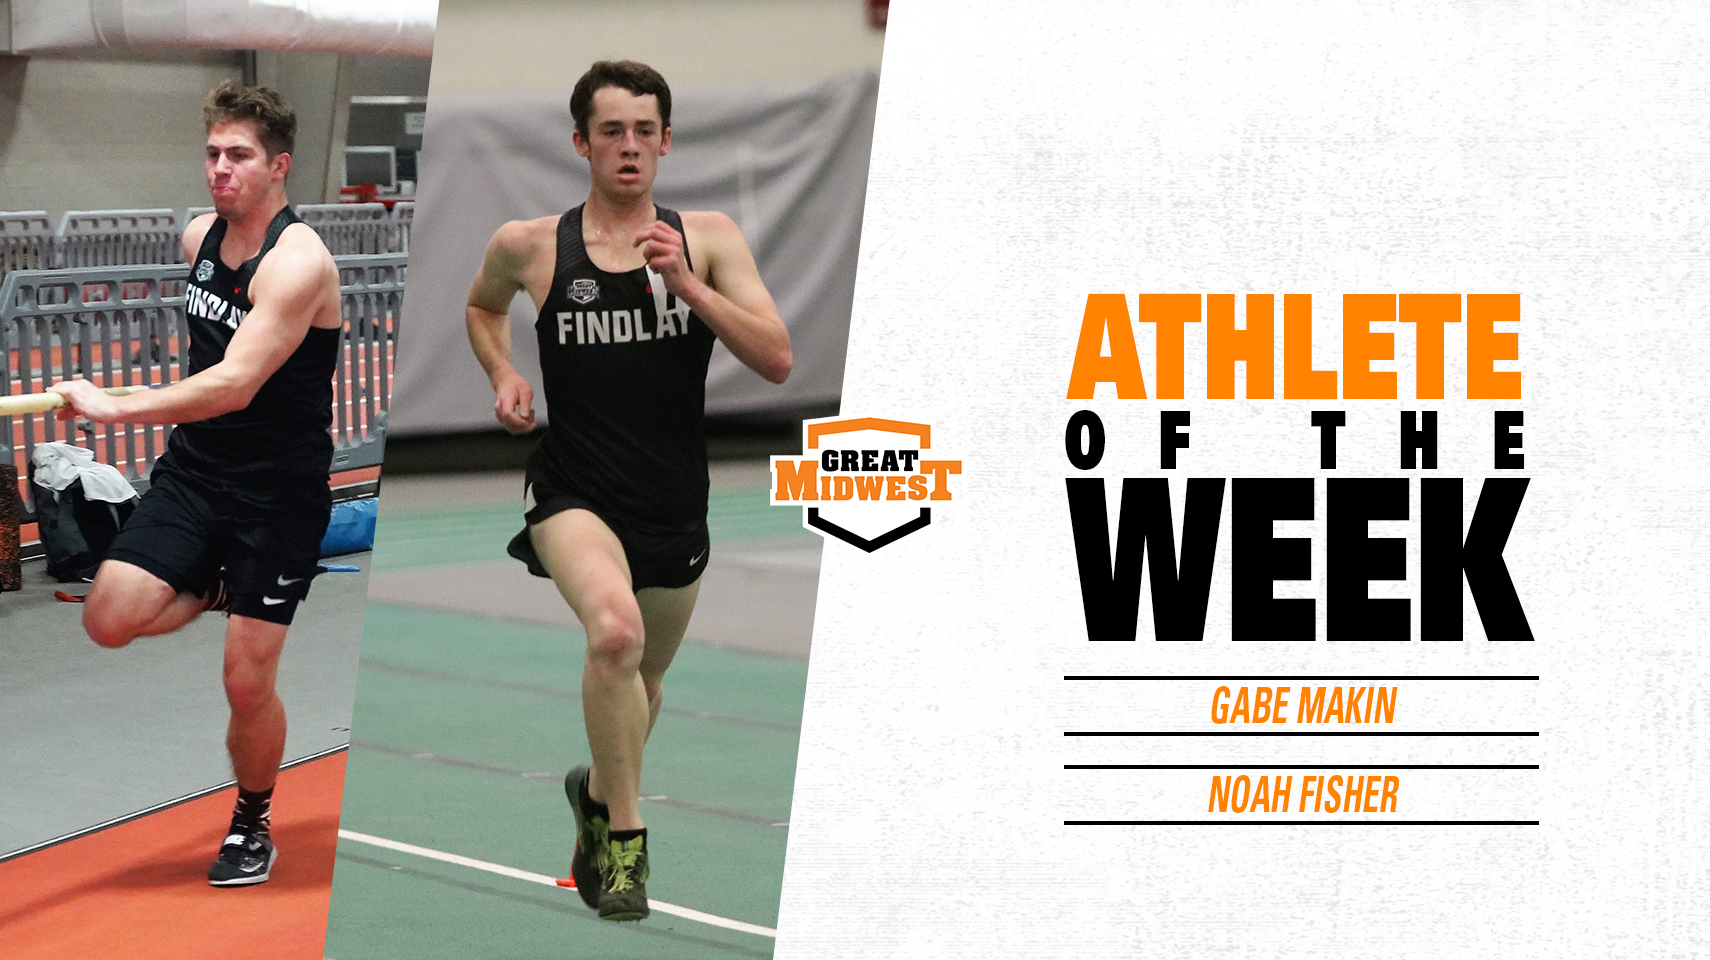 Makin and Fisher Earn Track and Field Athletes of the Week